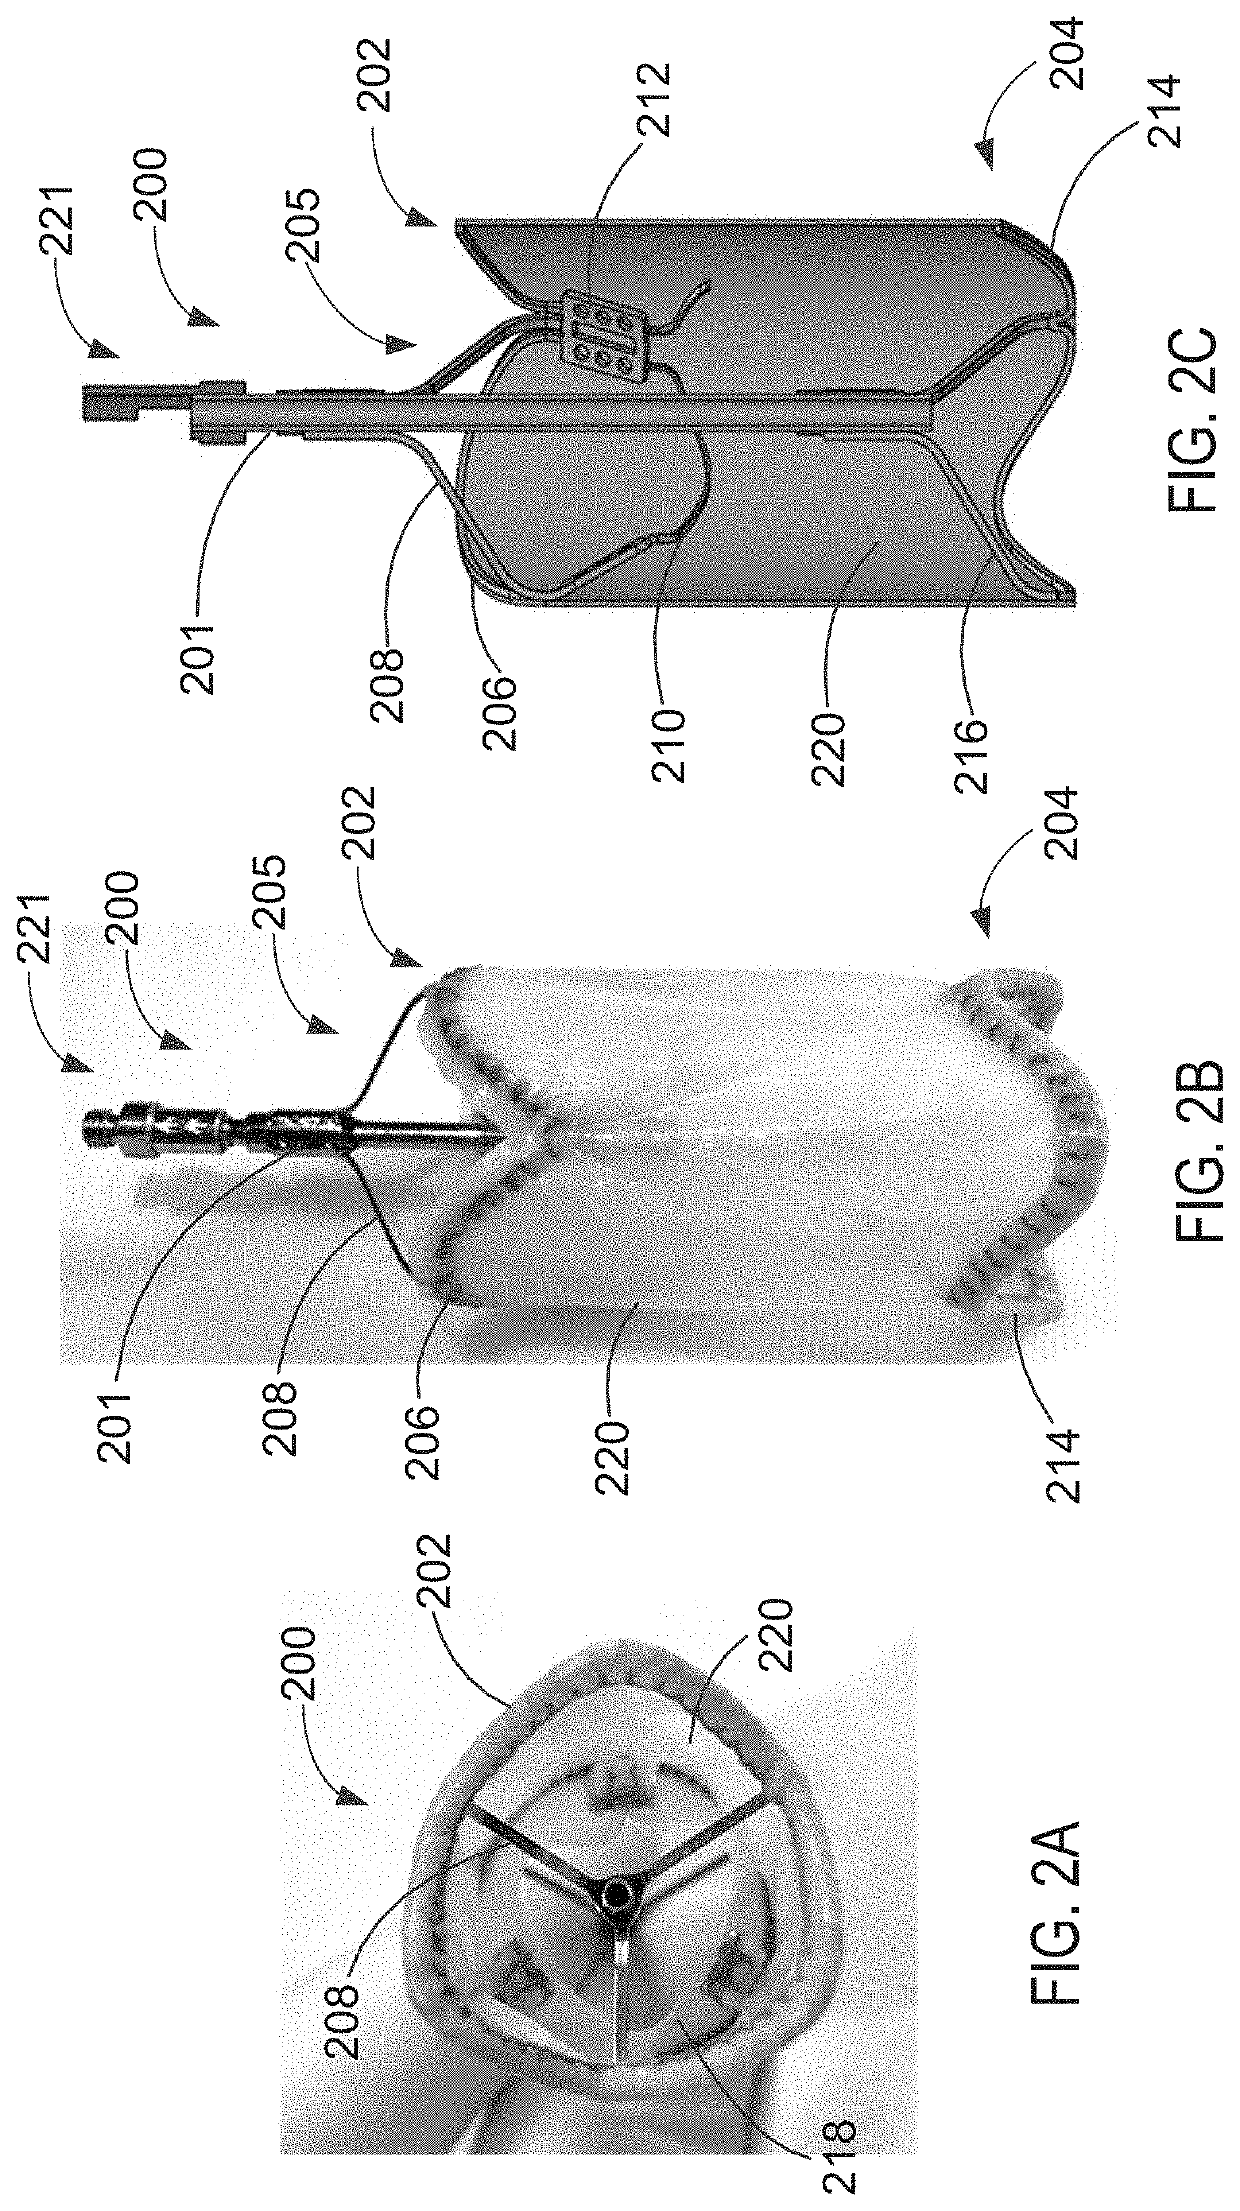 Apparatus and methods for treating a defective cardiac valve